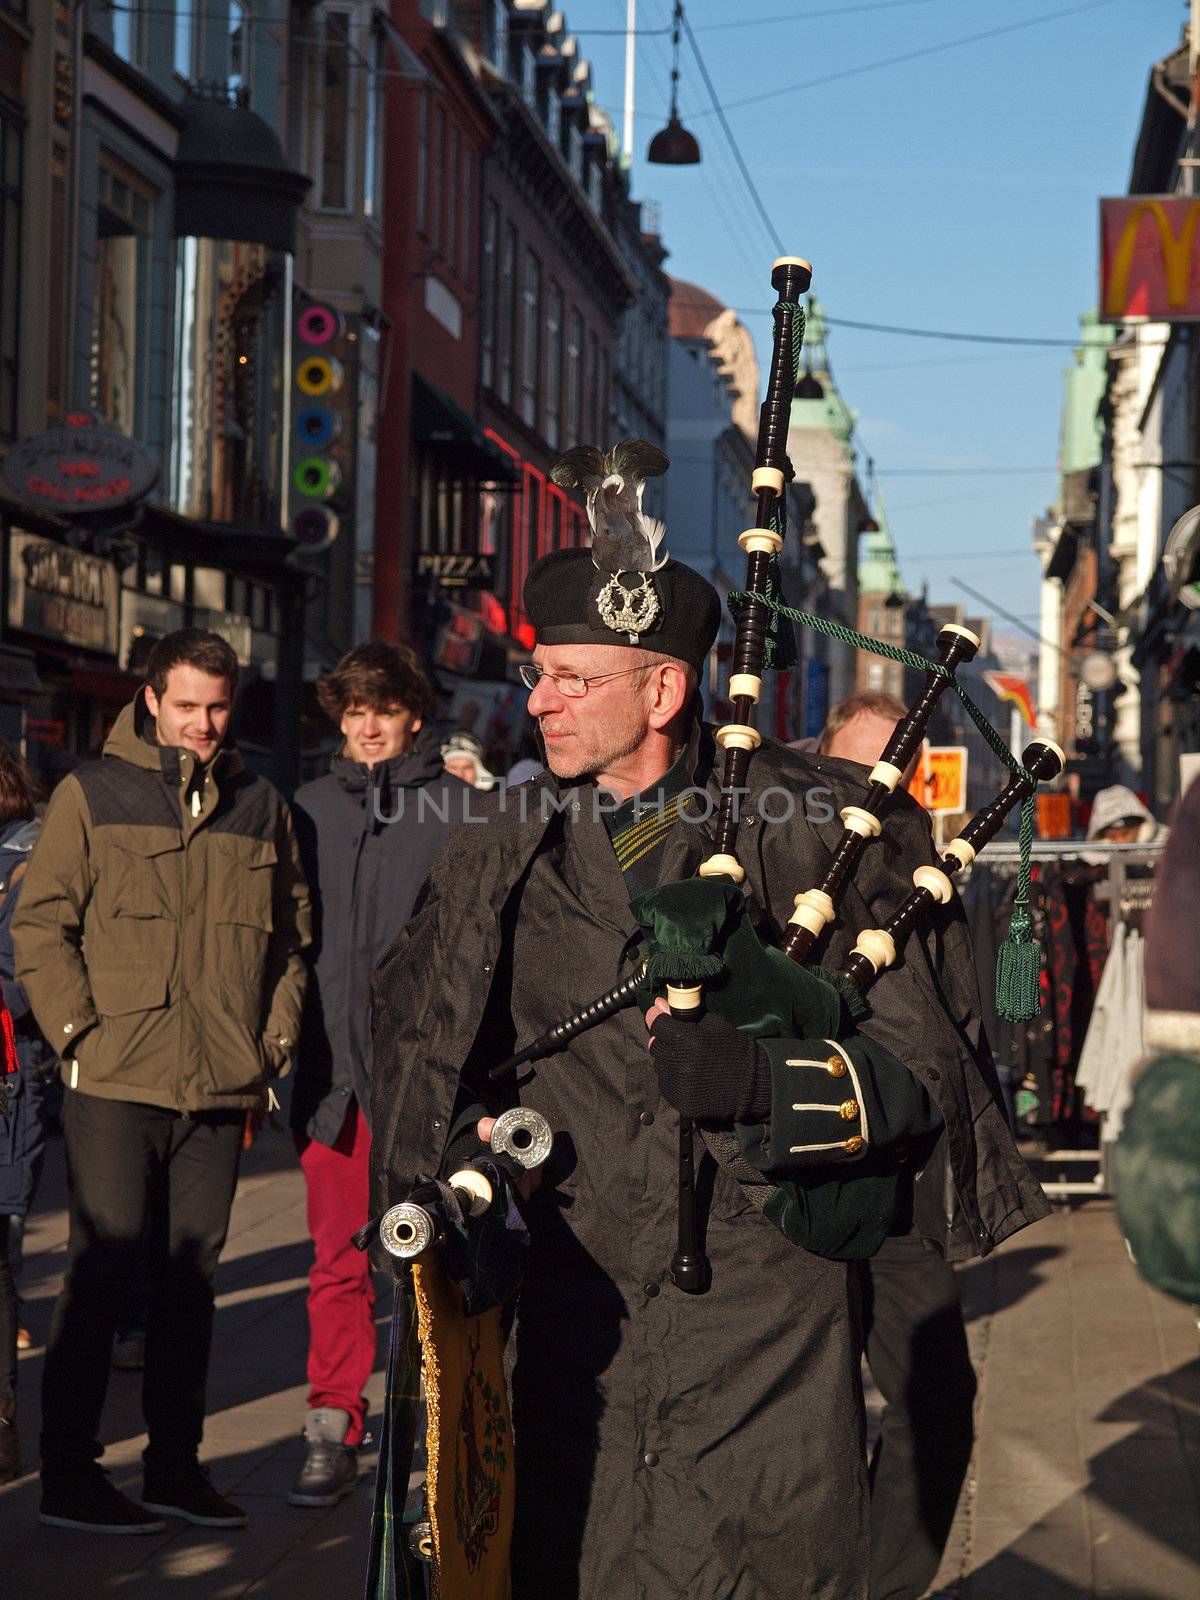 COPENHAGEN - MAR 17: Bagpiper at the annual St. Patrick's Day celebration and parade in front of Copenhagen City Hall, Denmark on March 17, 2013.
